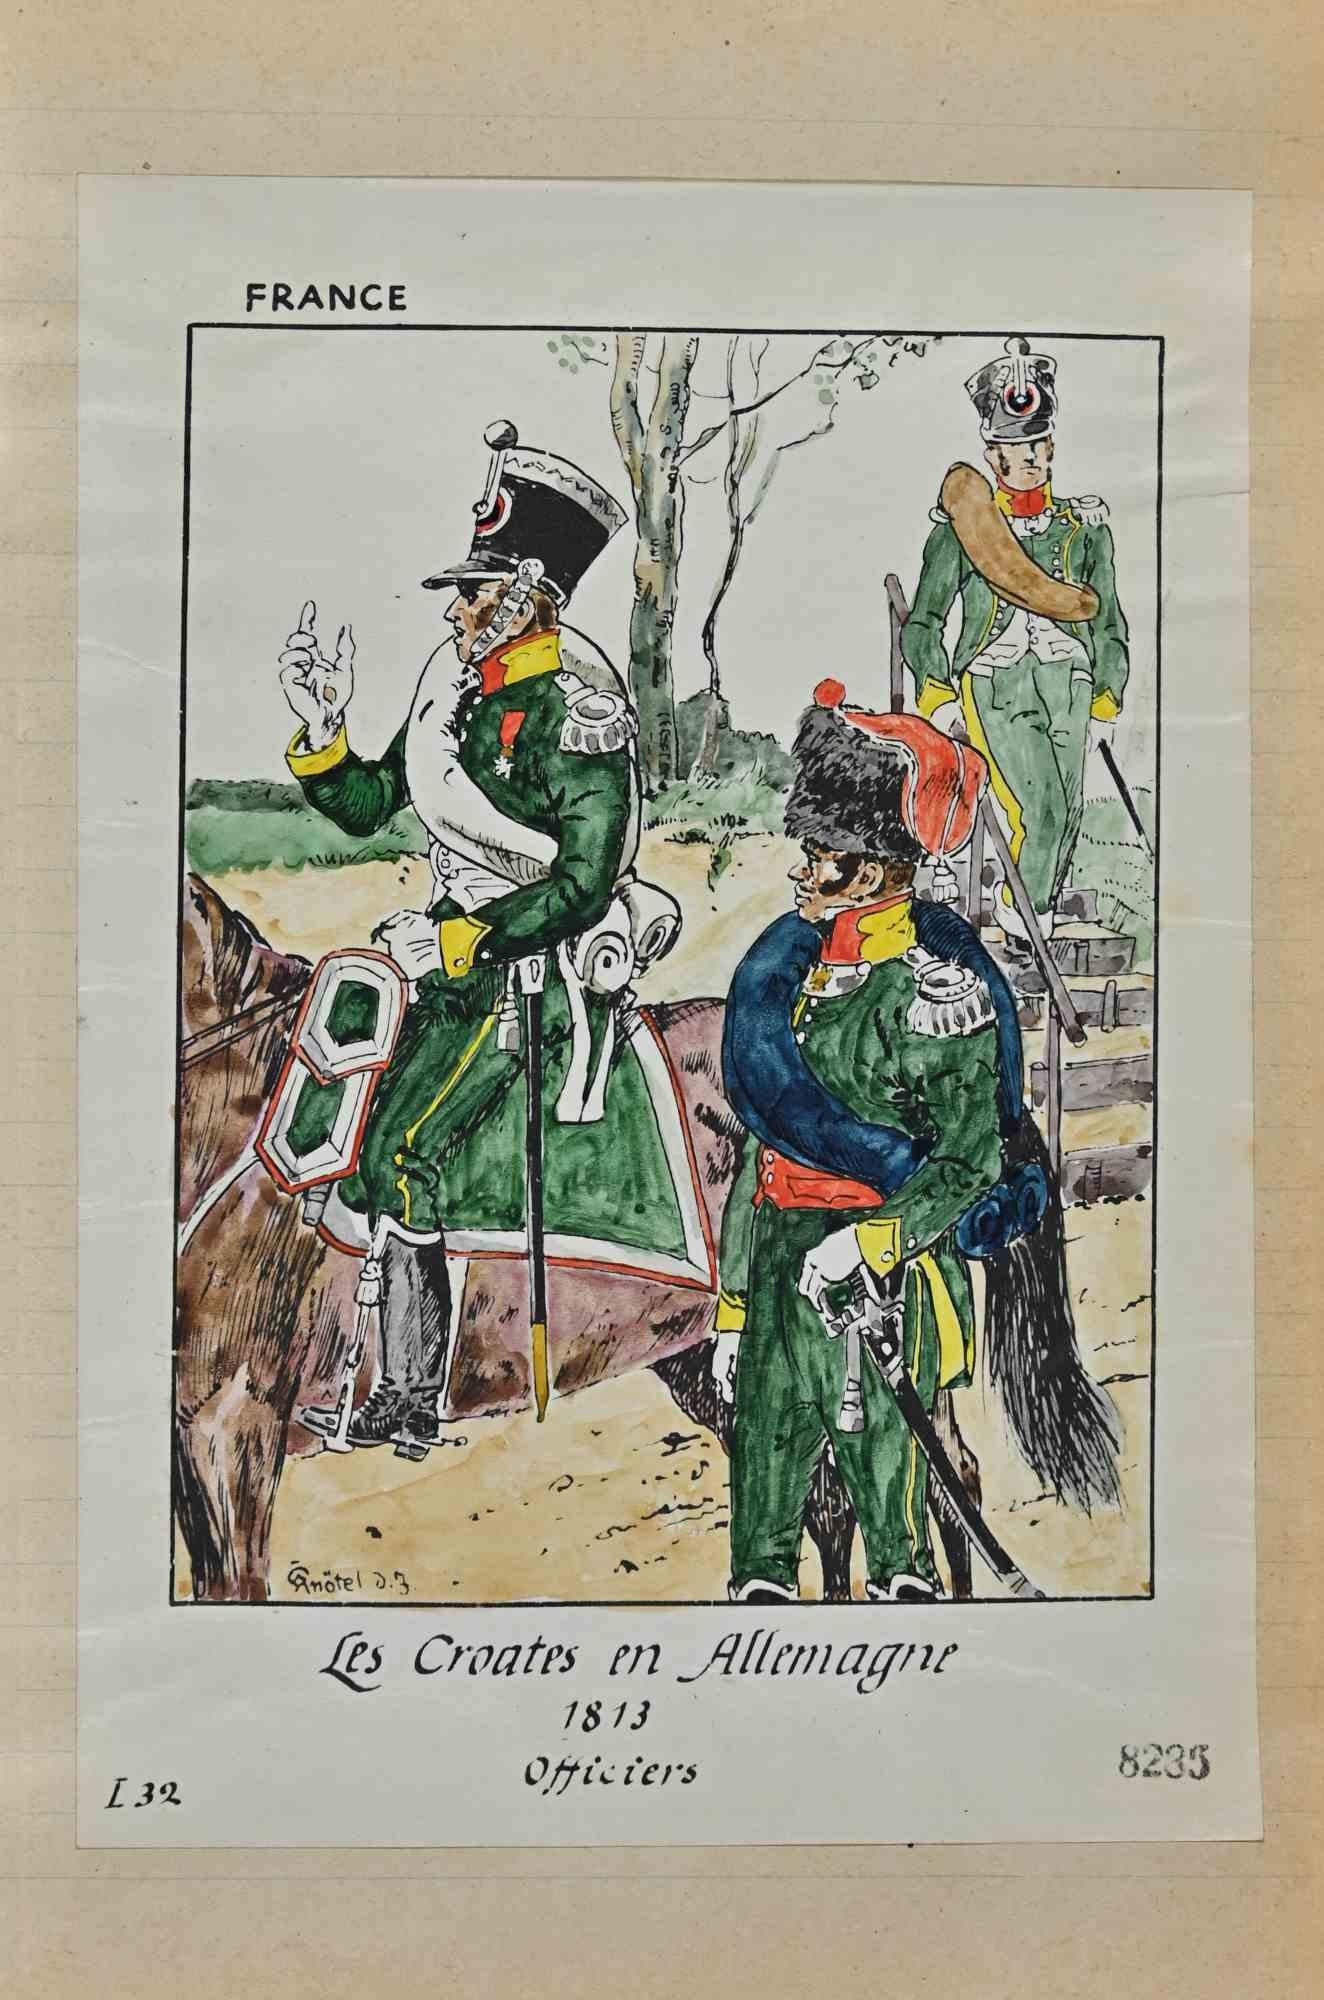 Le Croates en Allemagne is an original drawing in ink and watercolor realized by Herbert Knotel in 1930/40s.

Good condition except for being aged.

The artwork is depicted through strong lines in well-balanced conditions.

Herbert Knotel was a